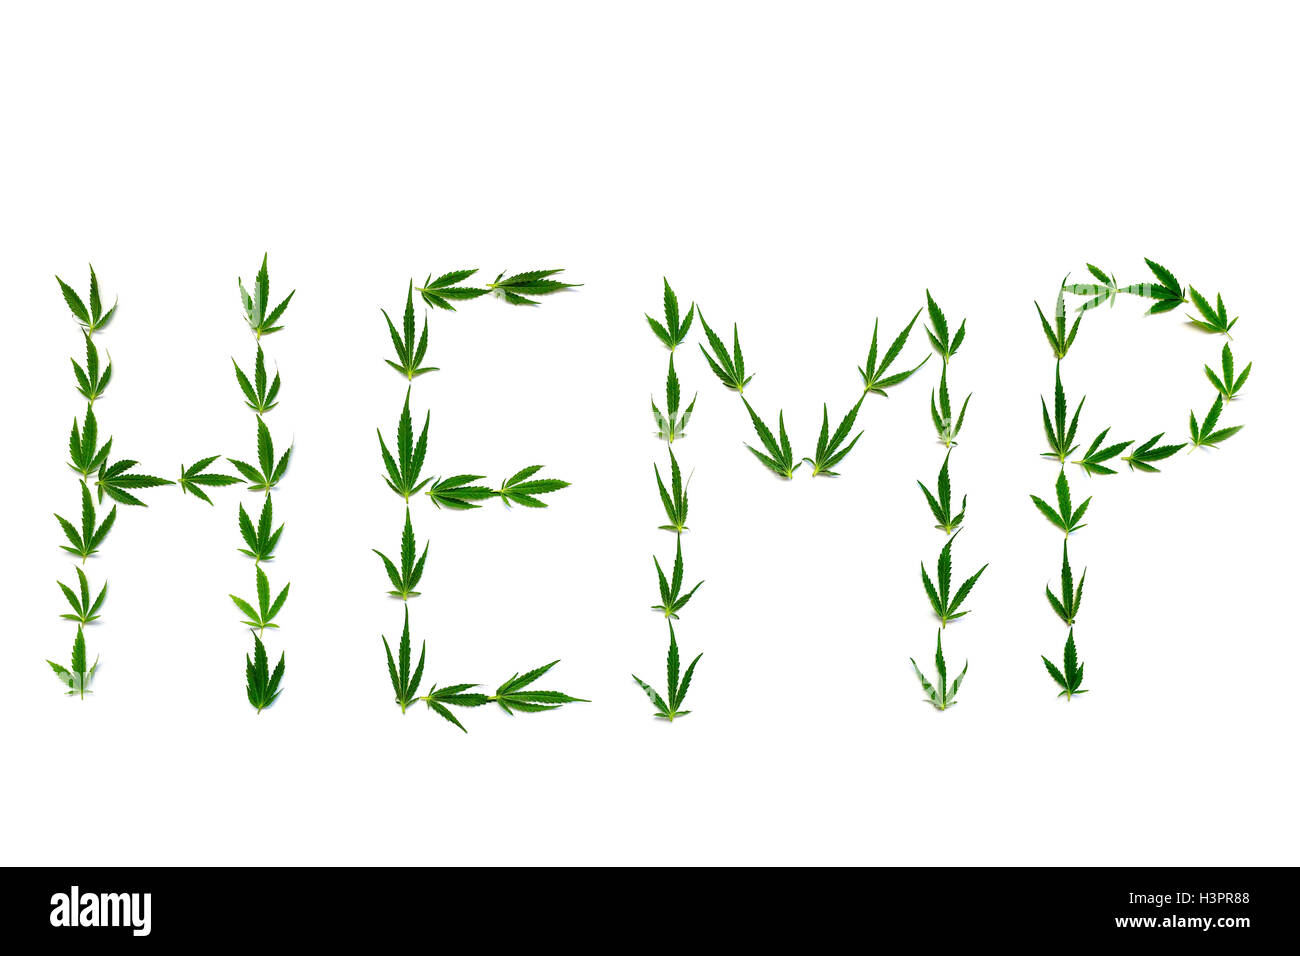 Word HEMP made of green leaves isolated on white background Stock Photo